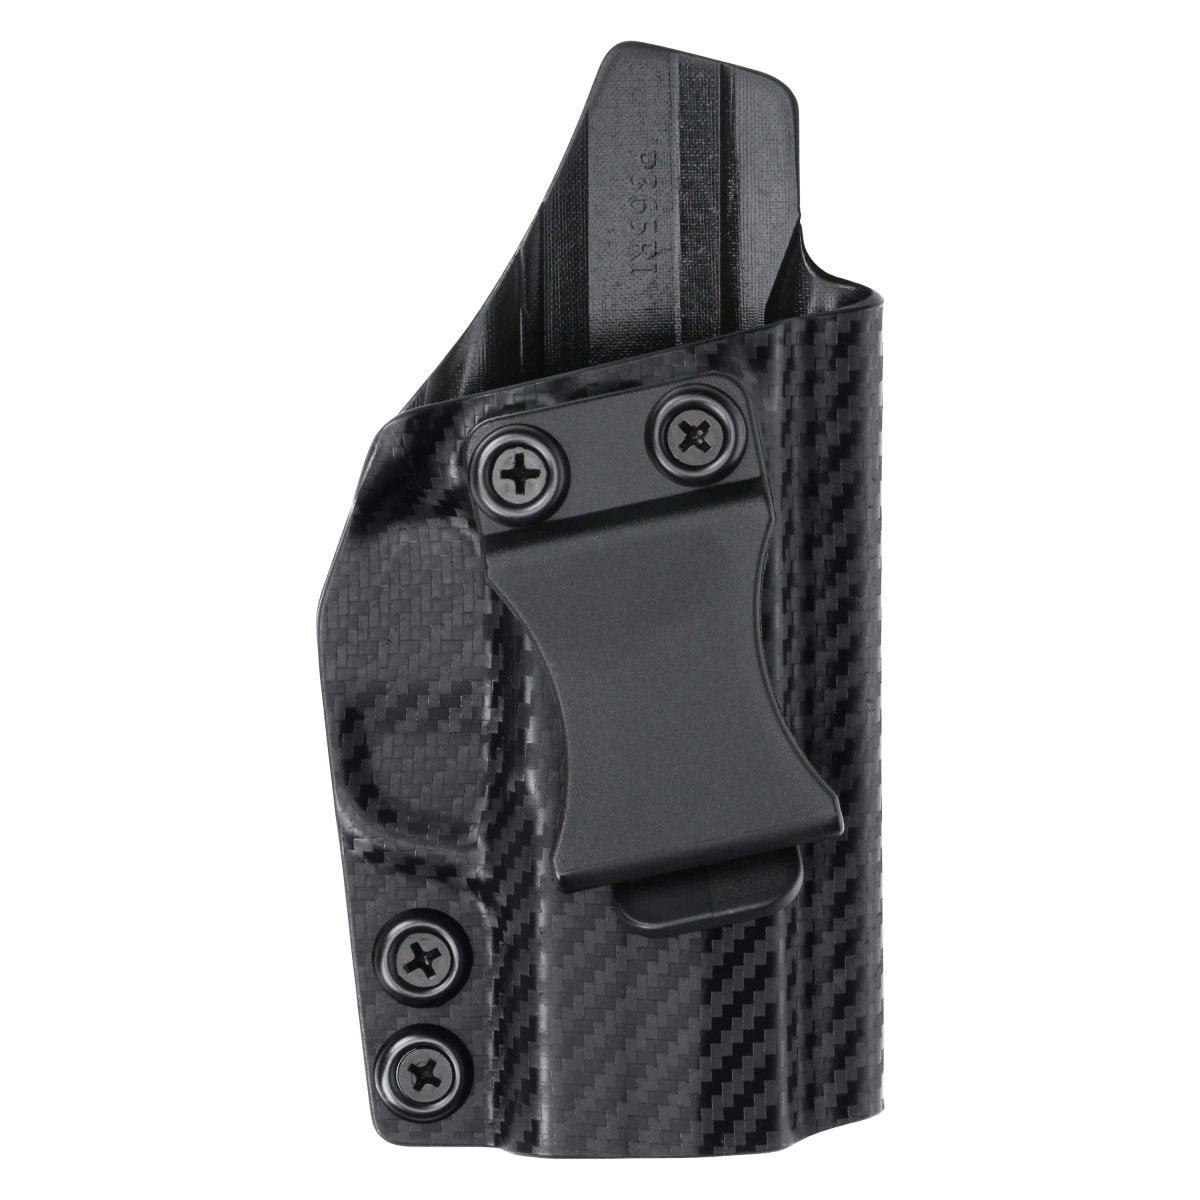 SR22 HOLSTERS